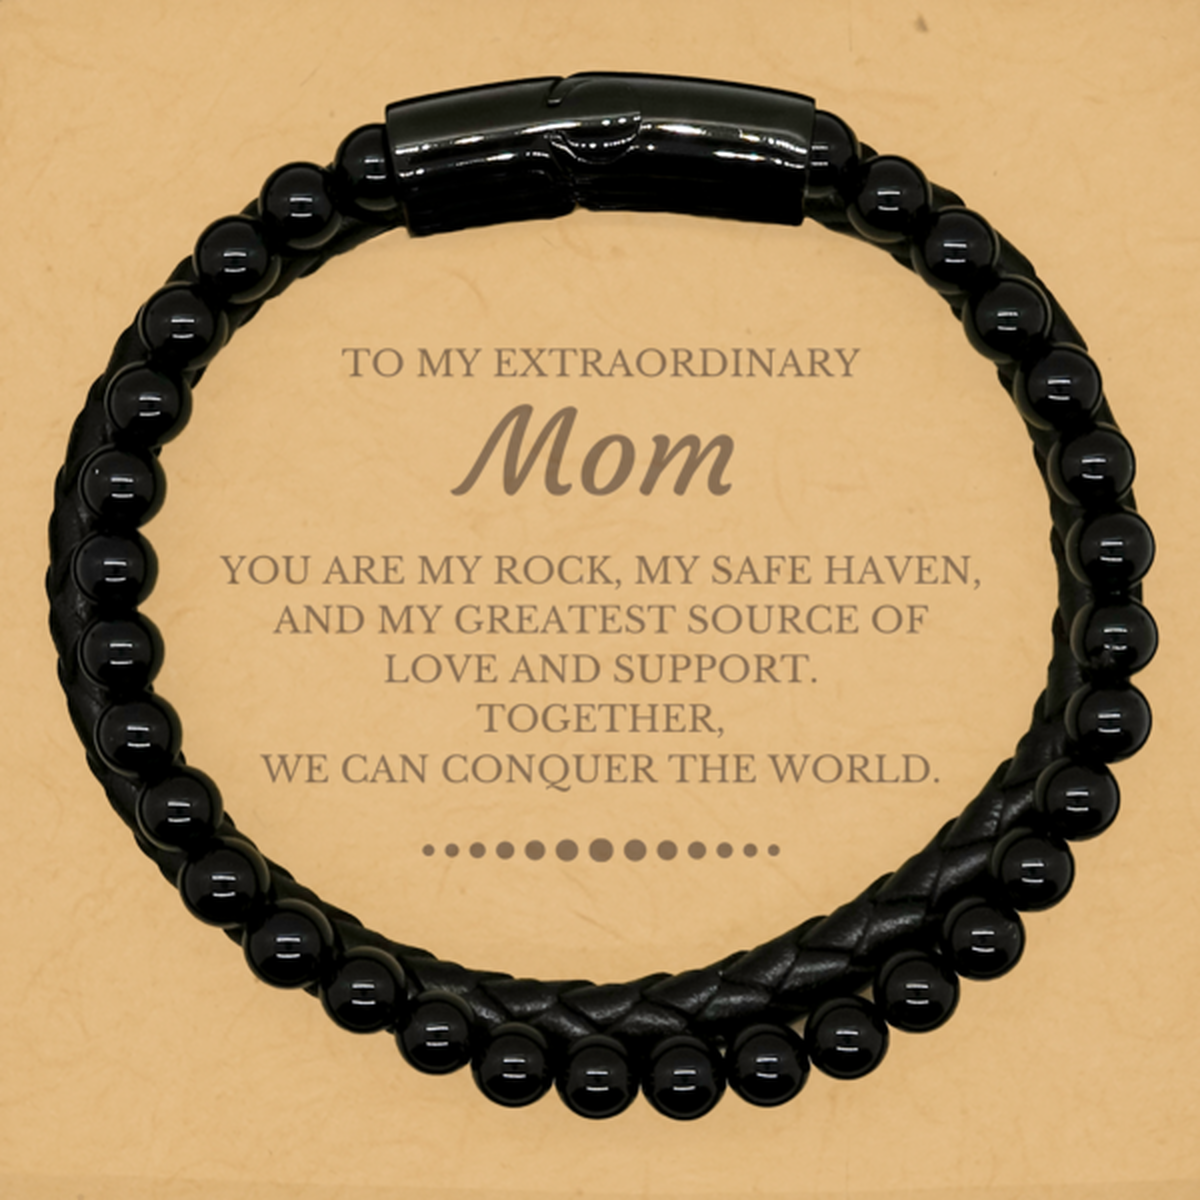 To My Extraordinary Mom Gifts, Together, we can conquer the world, Birthday Stone Leather Bracelets For Mom, Christmas Gifts For Mom